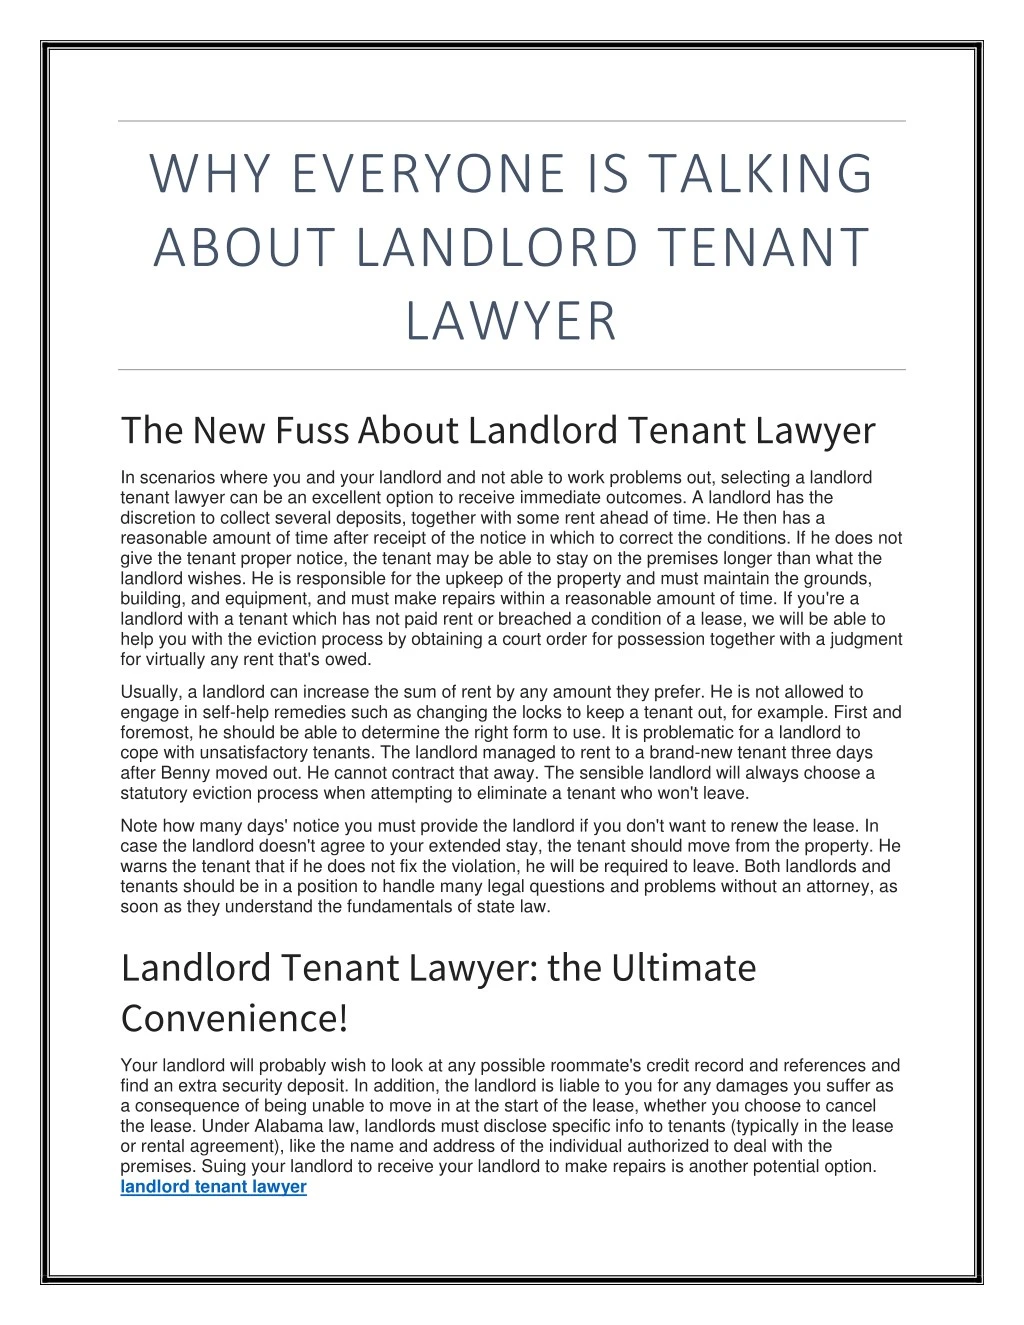 why everyone is talking about landlord tenant